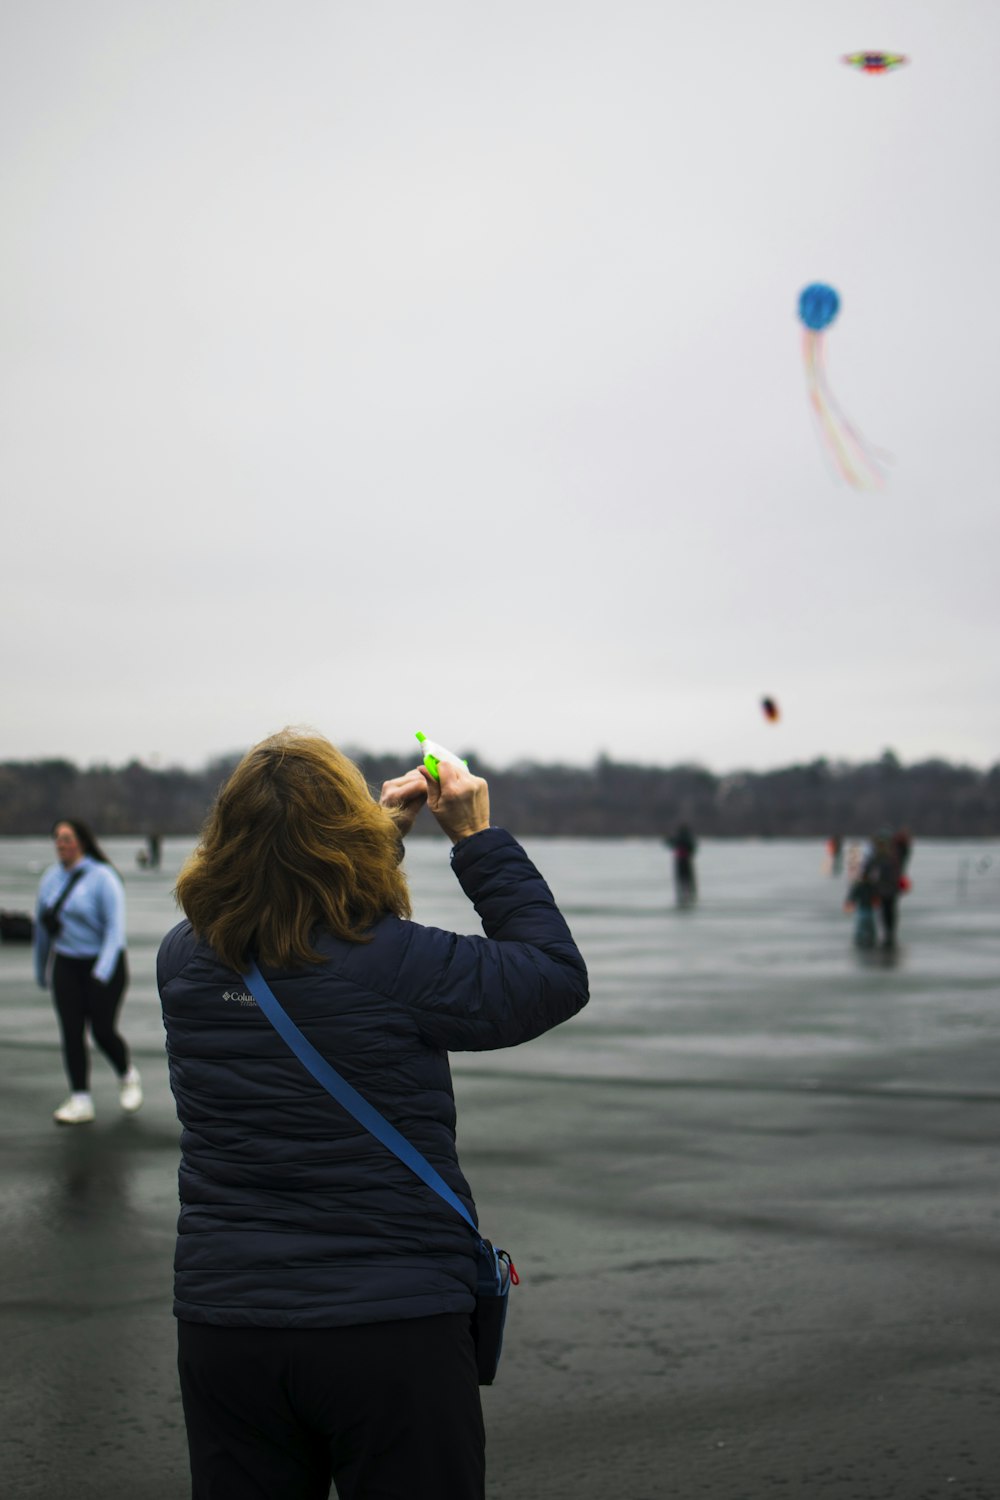 a woman is flying a kite on a cloudy day